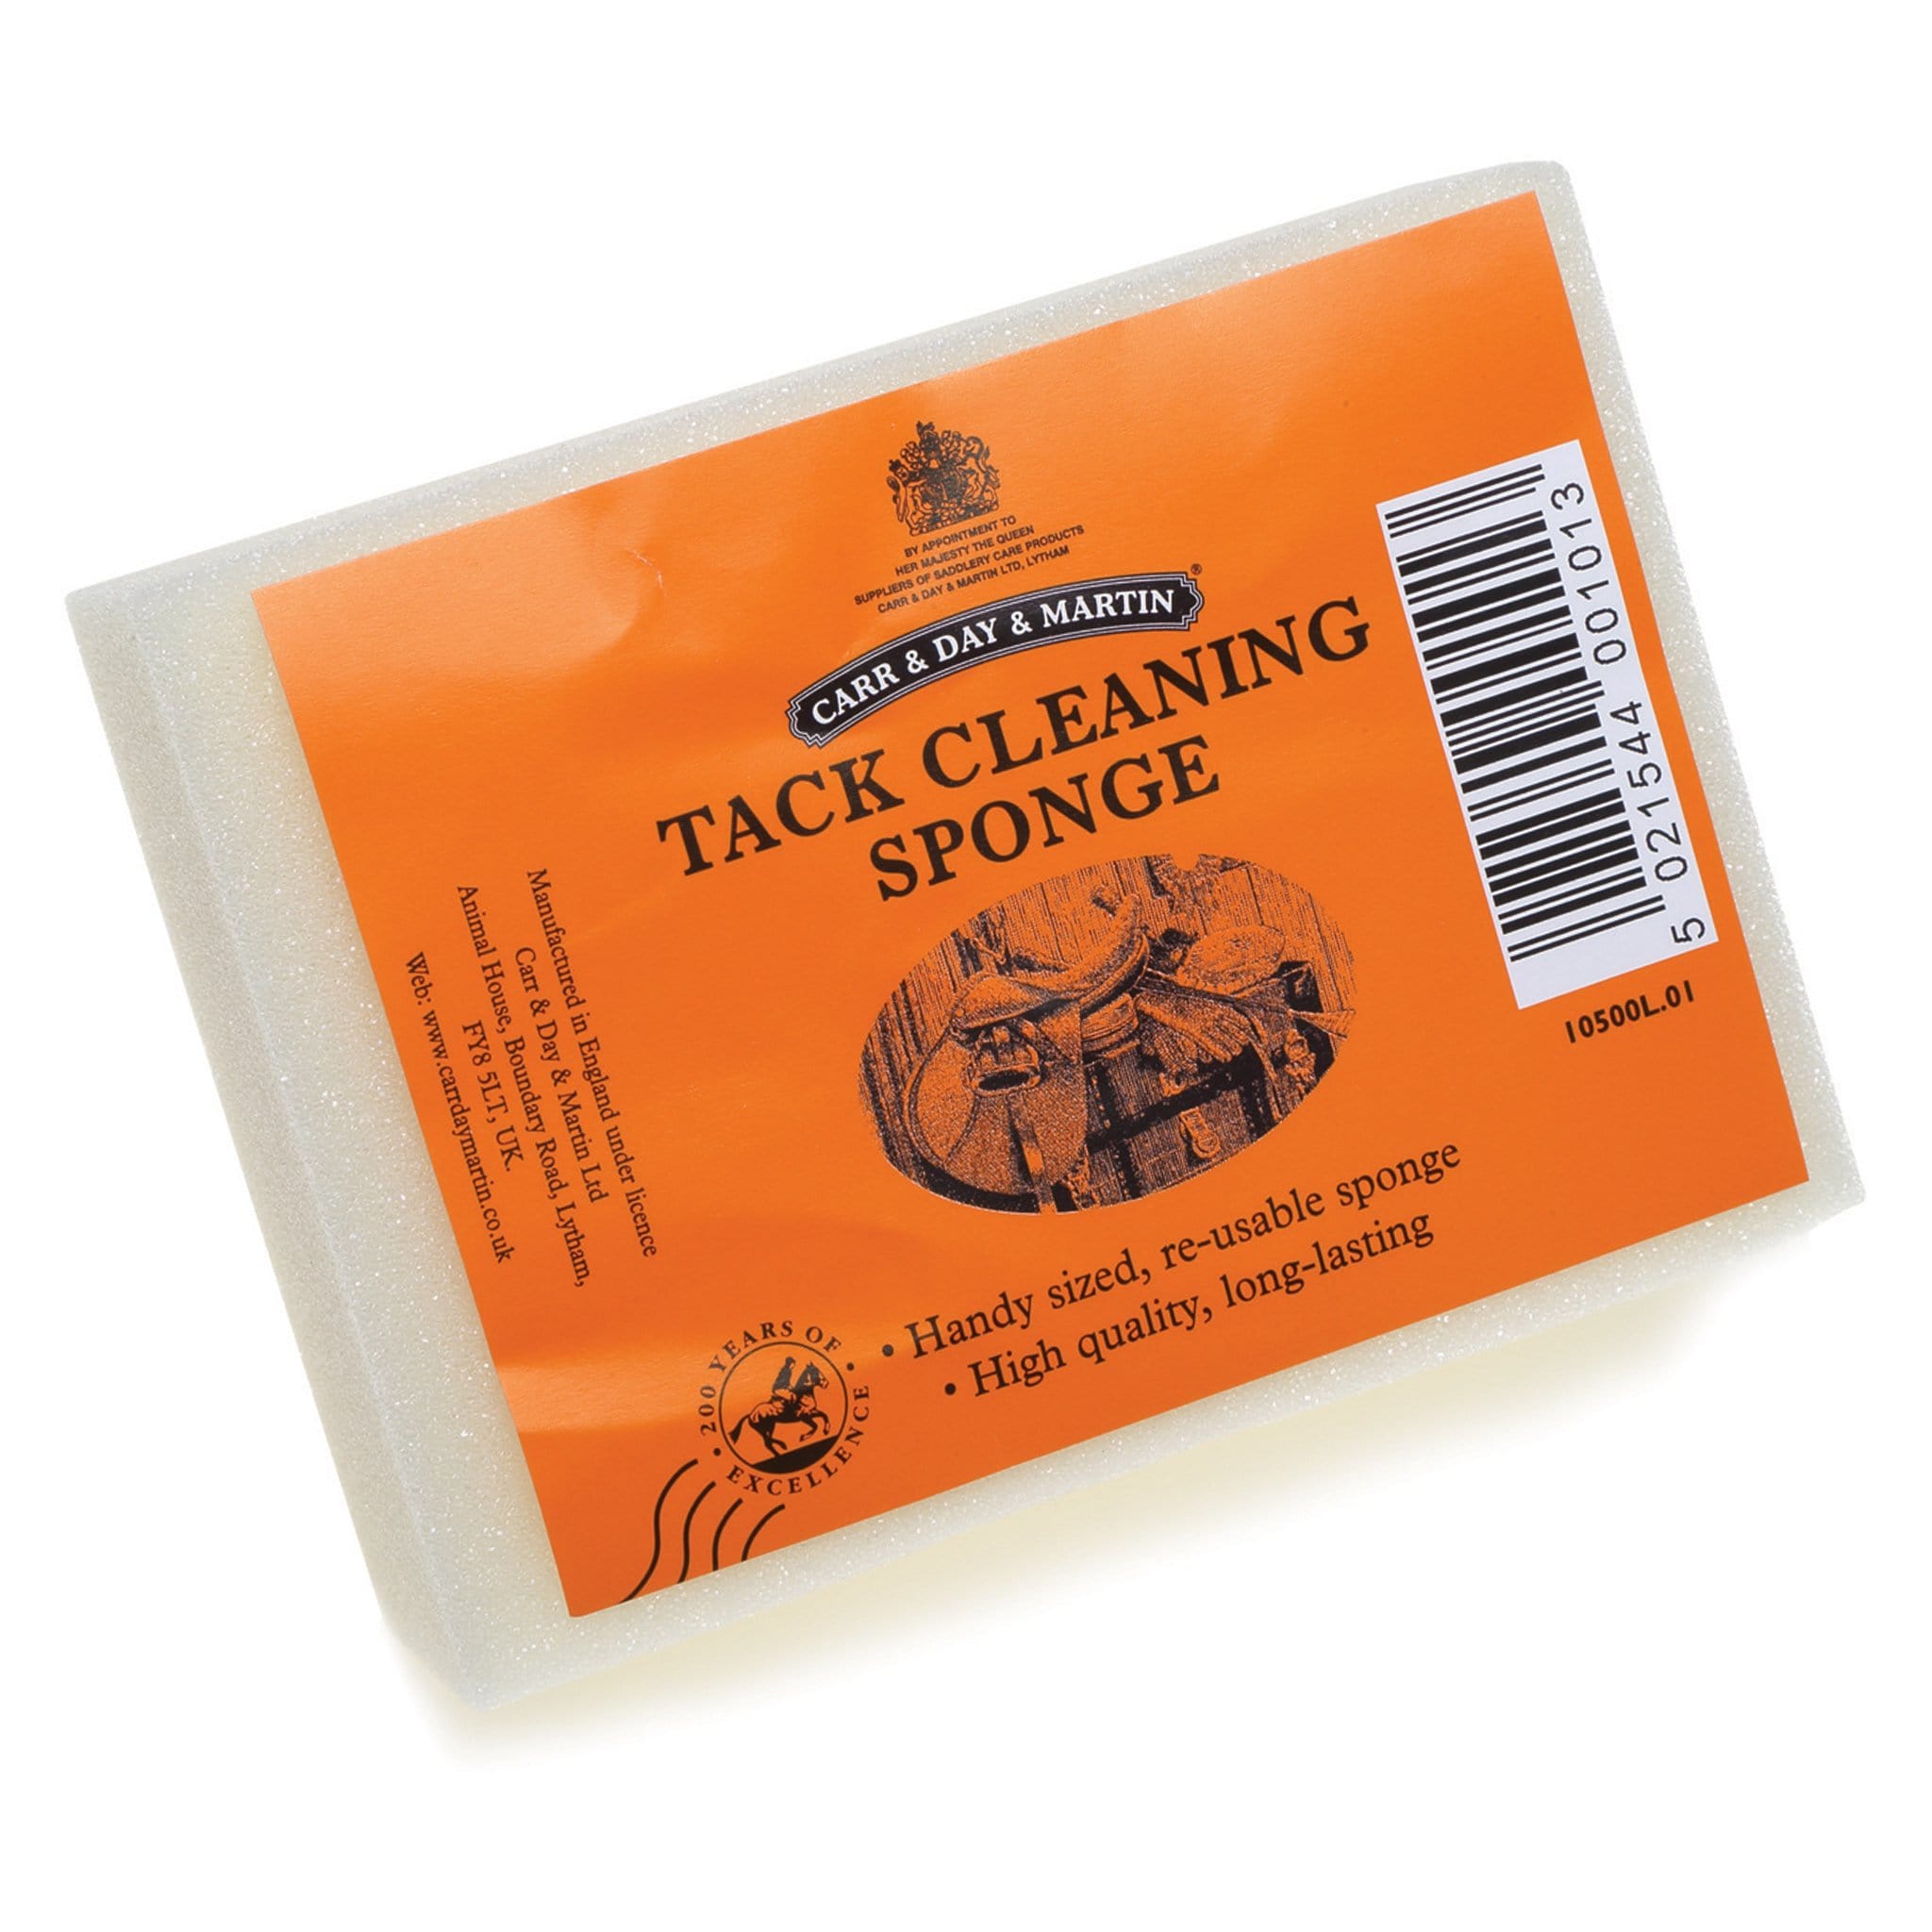 Carr & Day & Martin Tack Cleaning Sponge 7320